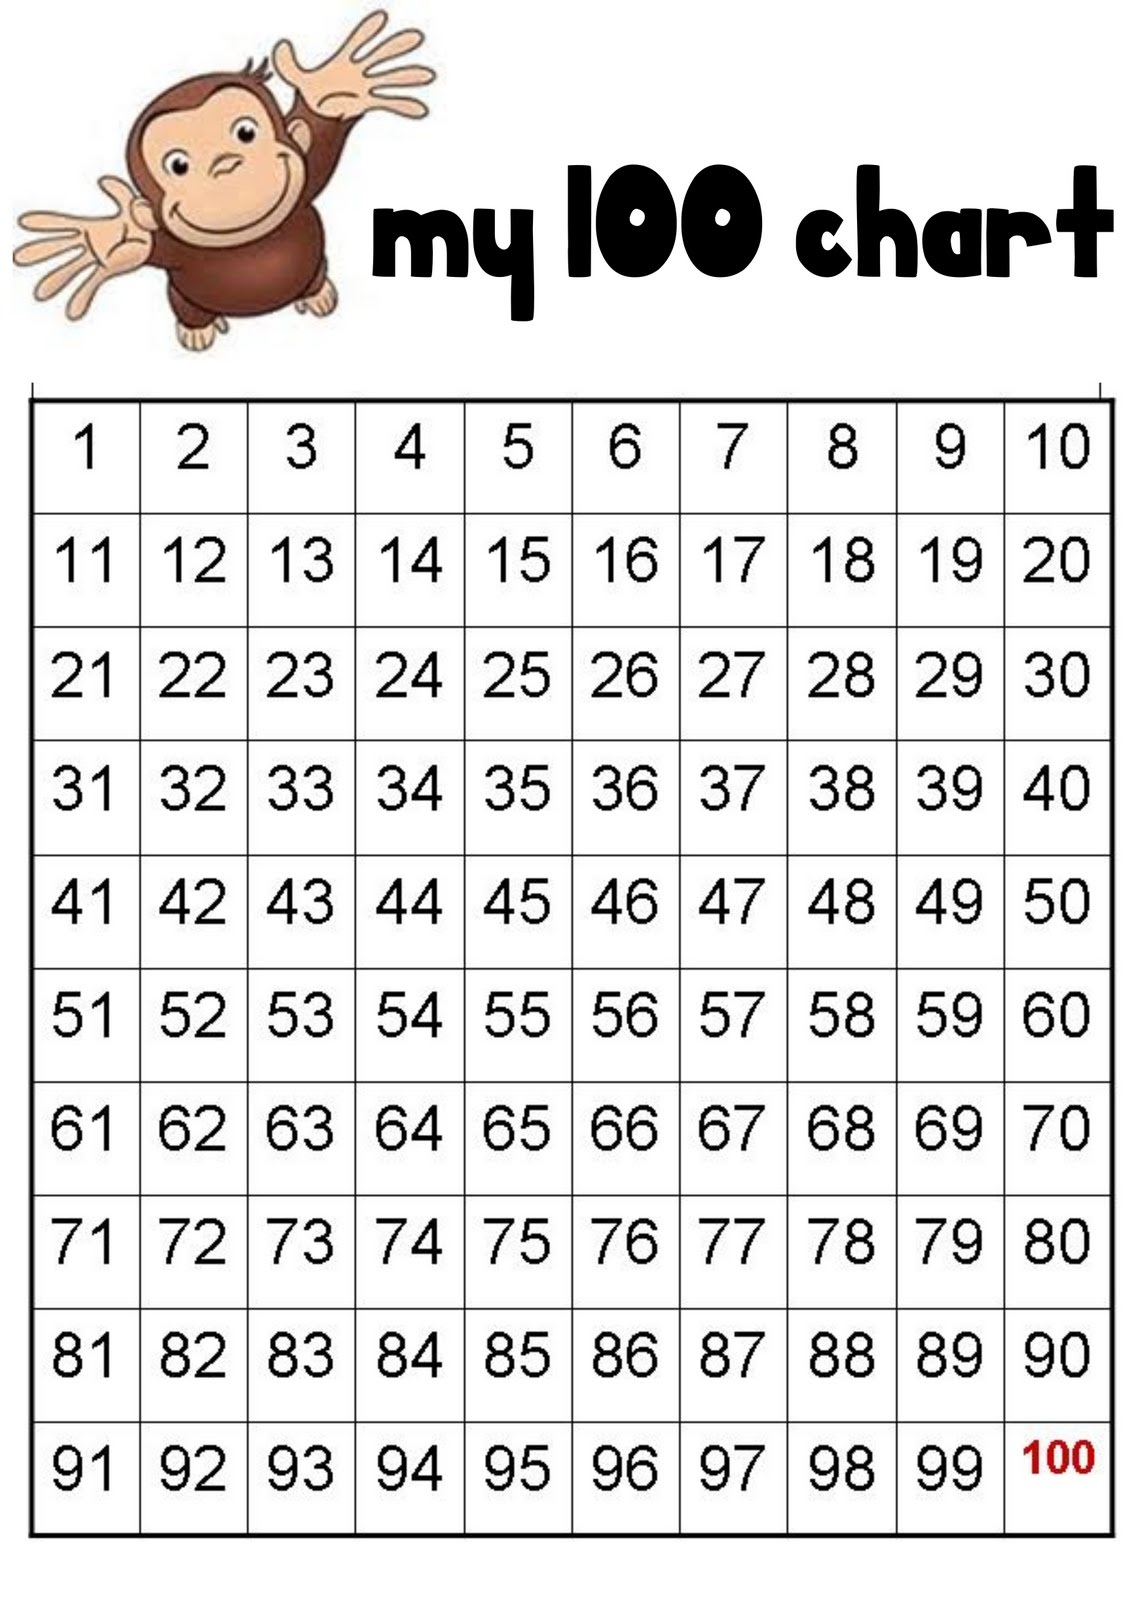 10-best-1-100-chart-printable-printableecom-printable-number-chart-1-100-activity-shelter